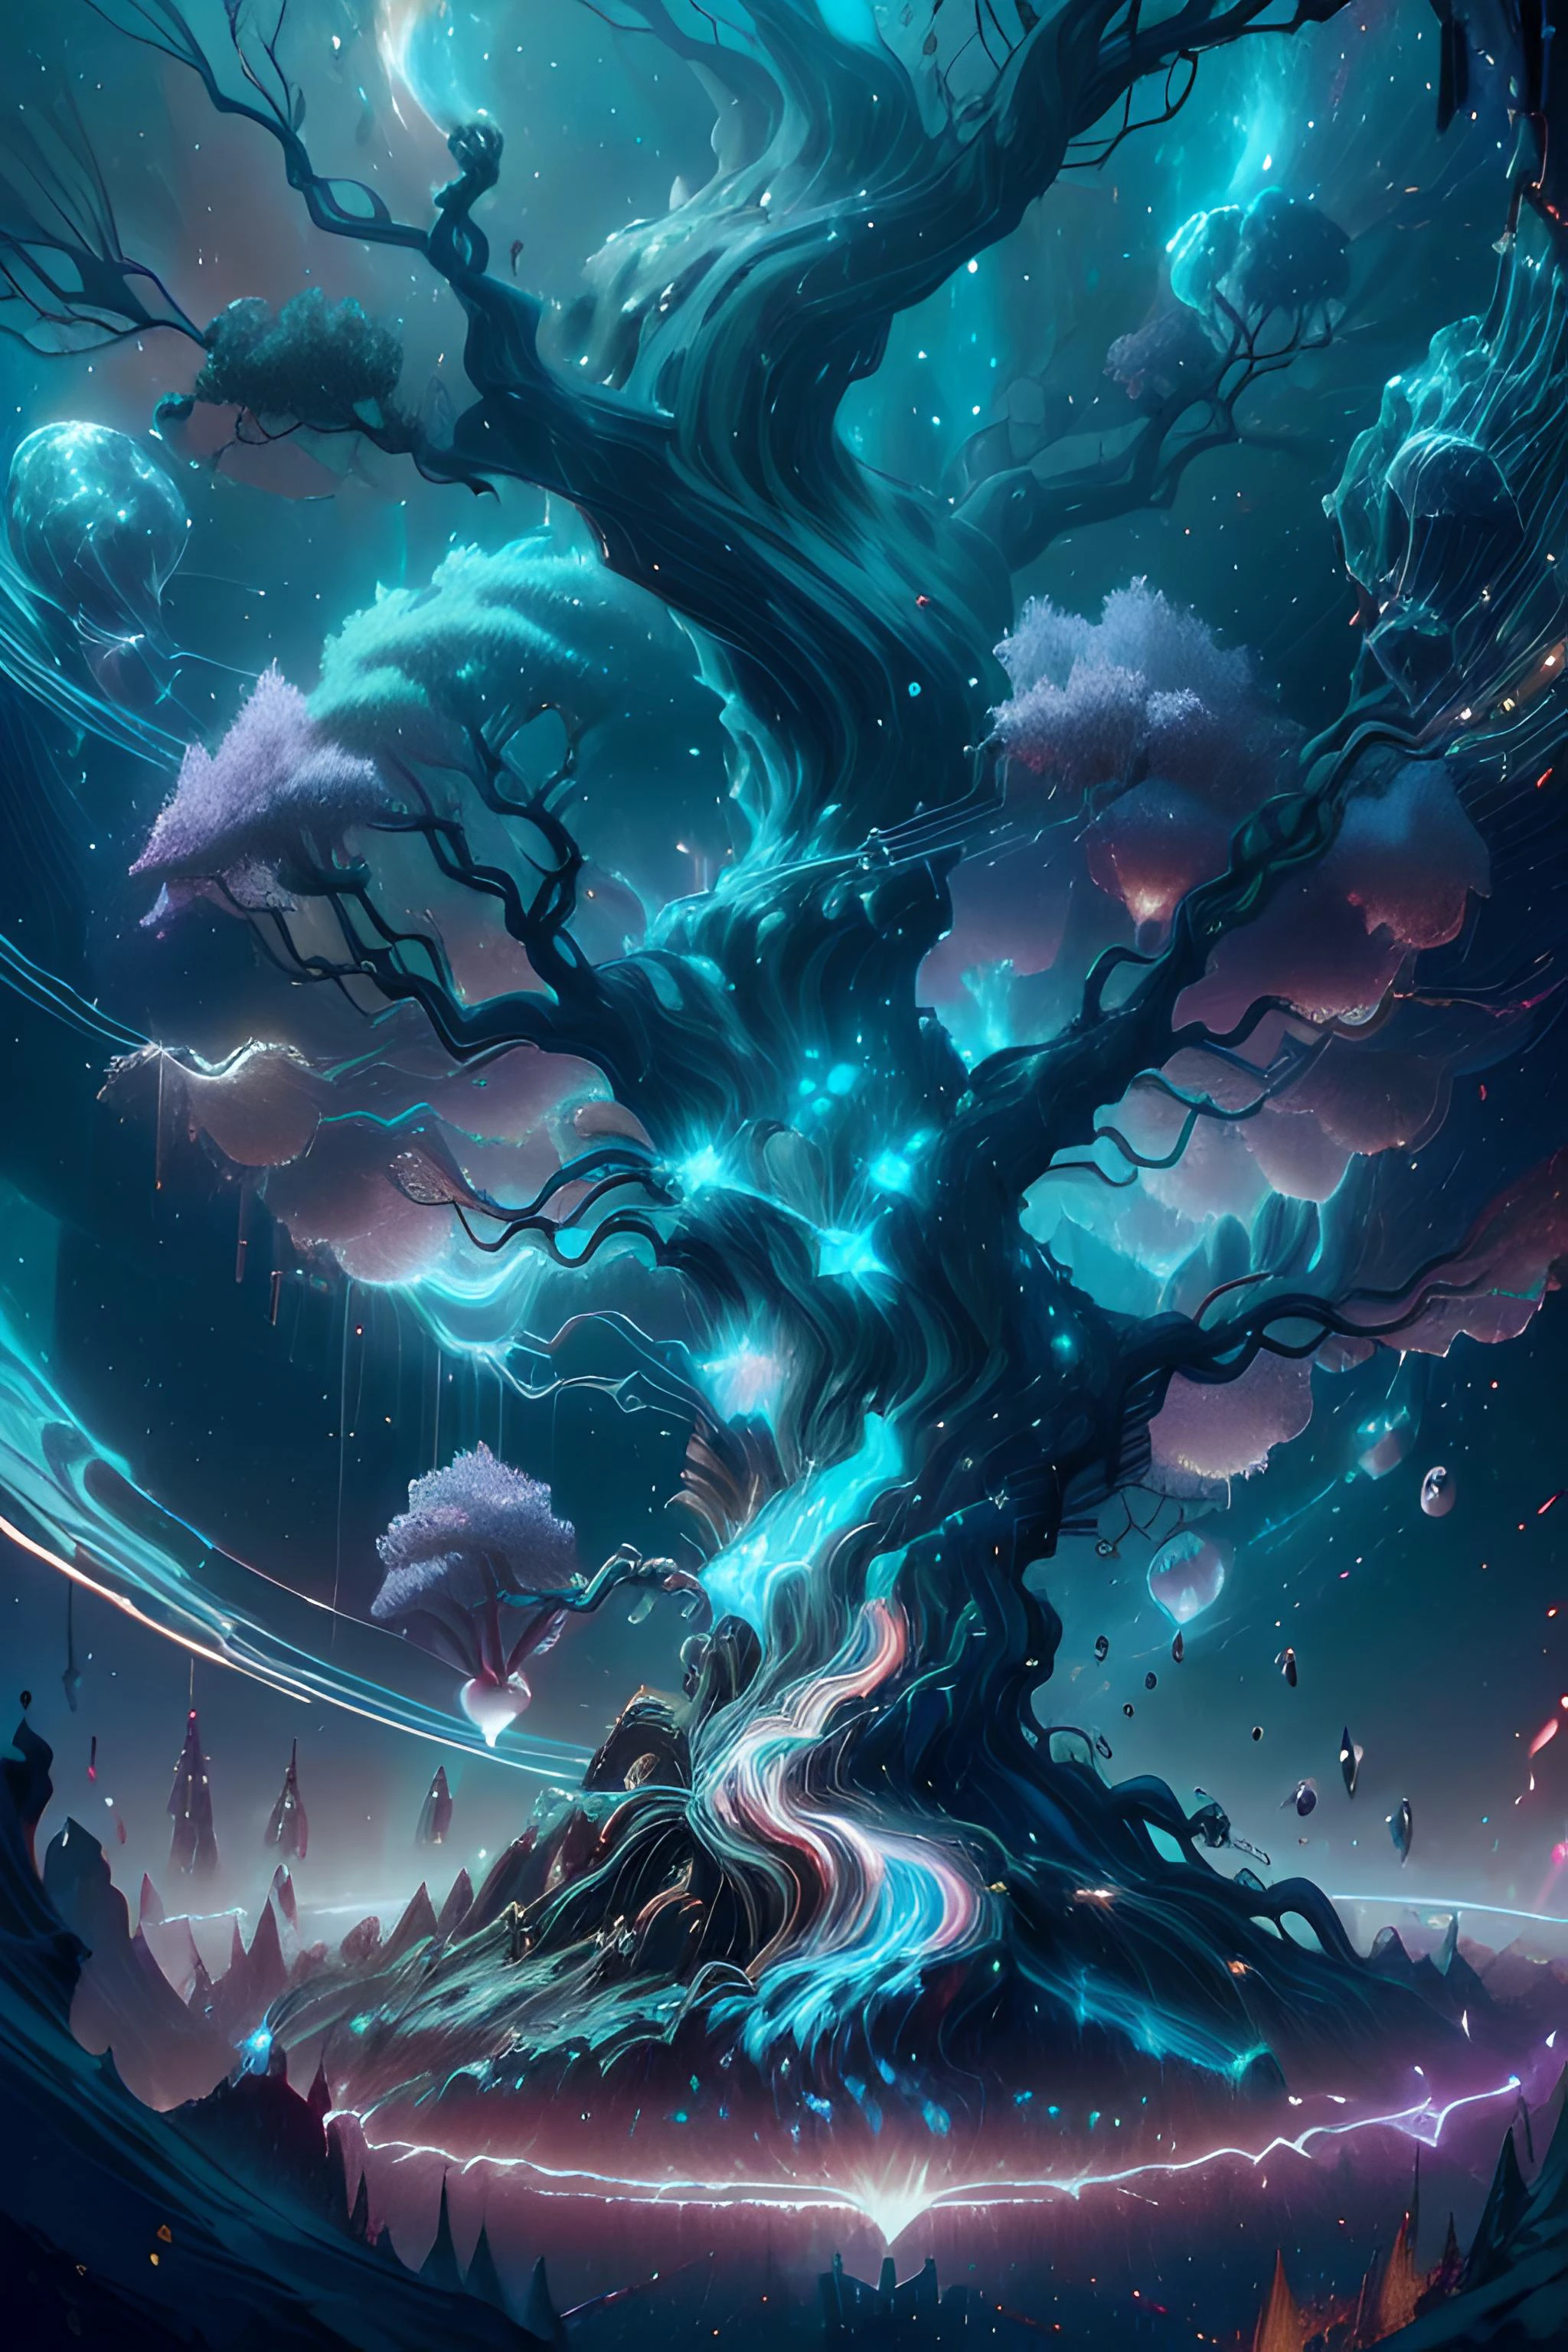 (((A Massive Tree full of Stars and galaxies in a vibrant fantasy forest))), (((Colorful Flowers))), (((Mountains in the background)), creationmagic , ethereal creation, fragmented construct, particles stream psionicmagic , mana flow, shimmers, psychic energy abyssaltech , dark energy, ethereal, dissolving, see-through, abyss